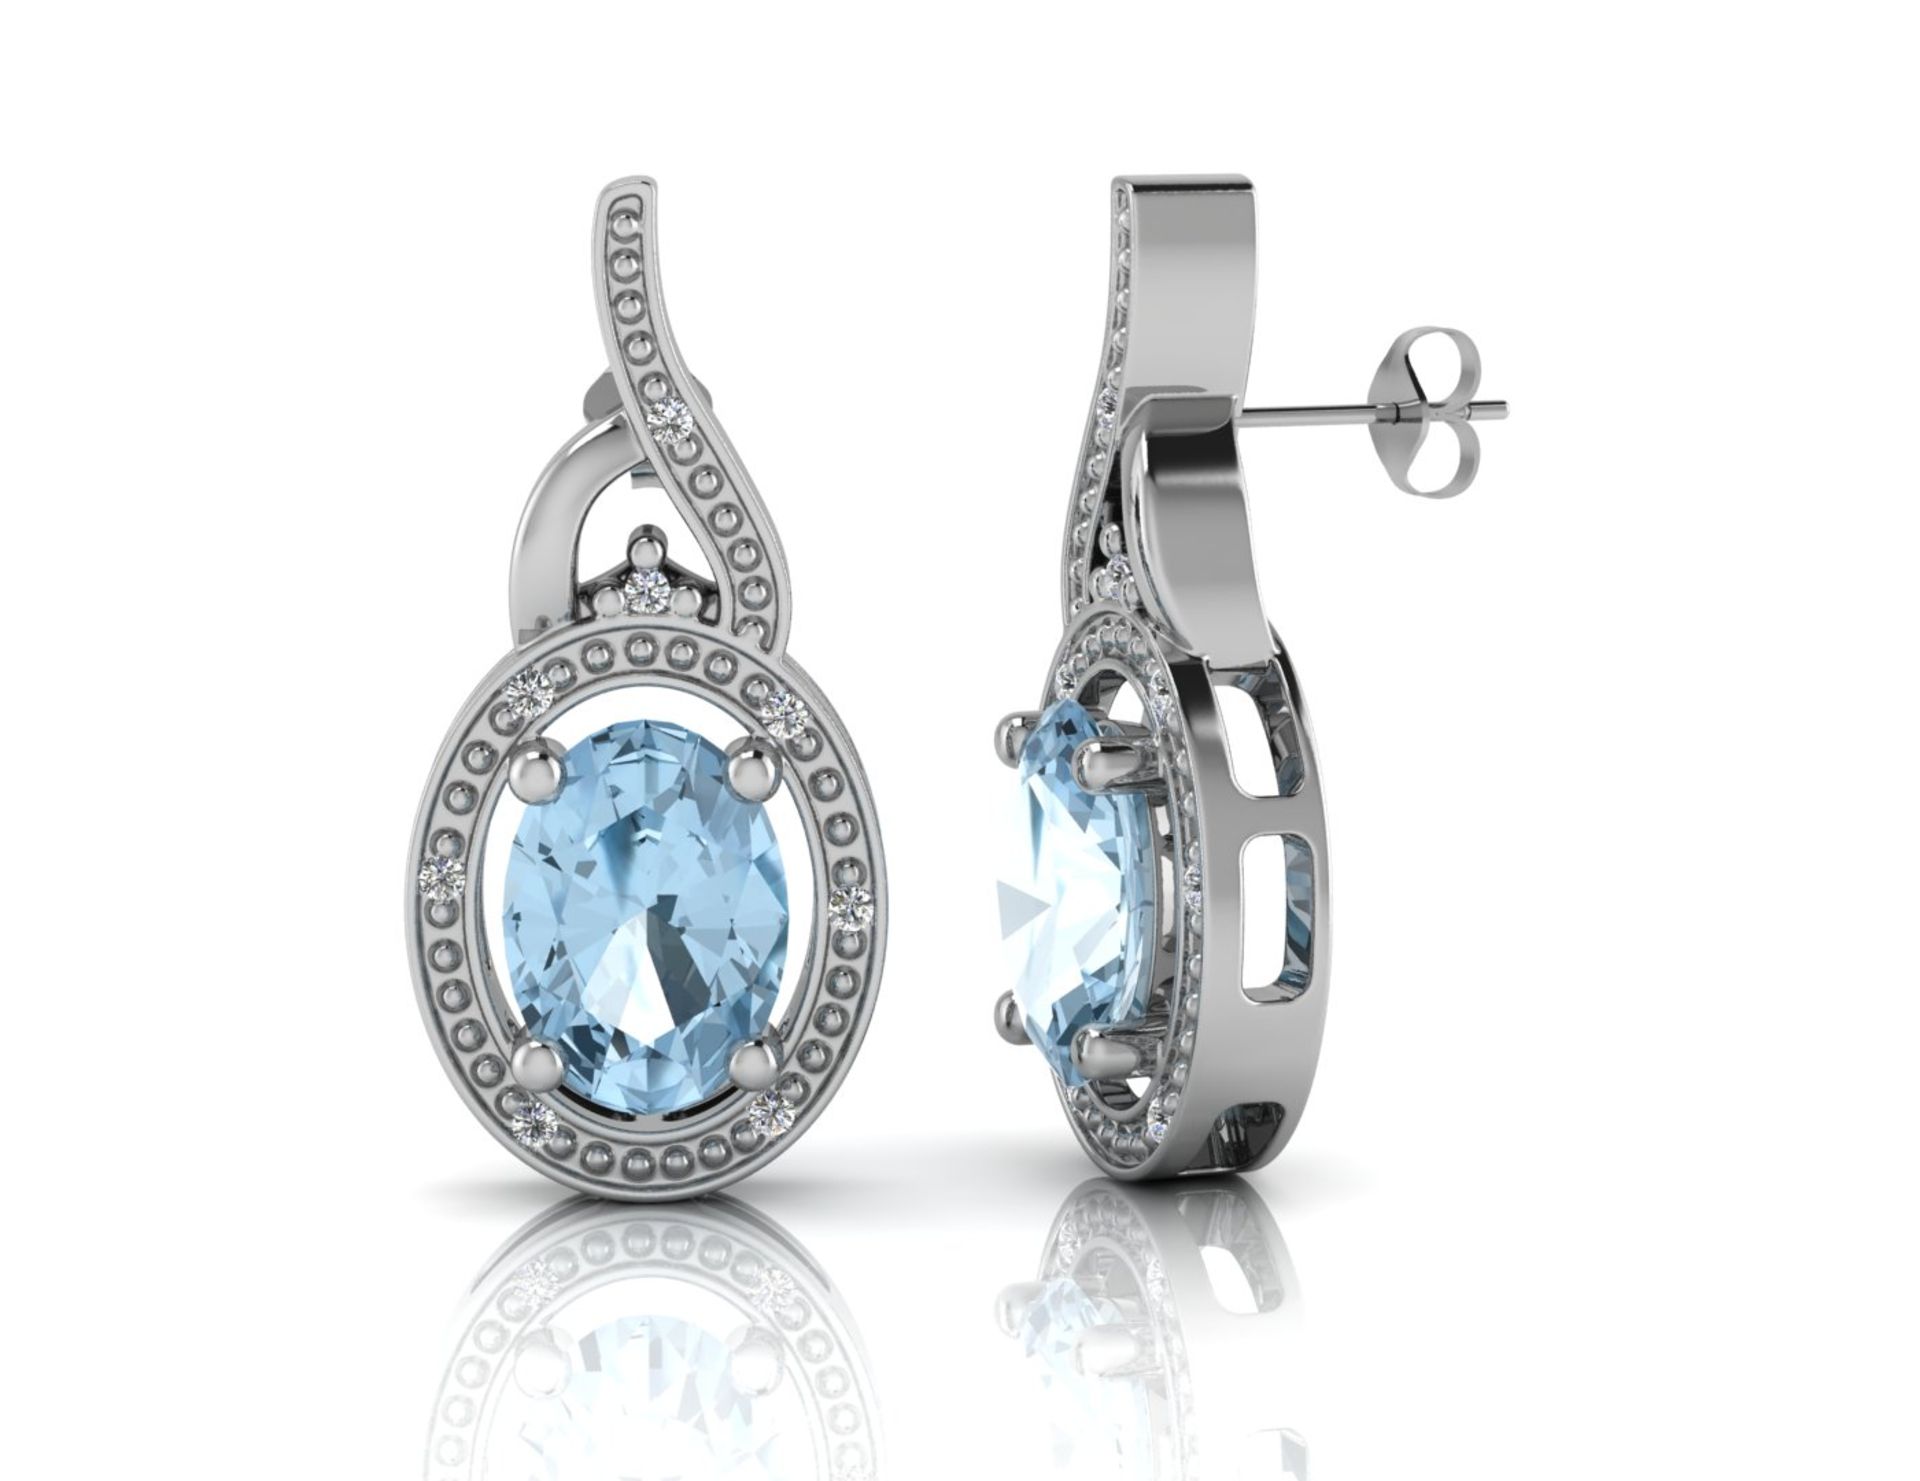 9ct White Gold Diamond And Blue Topaz Earring (BT1.69) 0.05 Carats - Valued By GIE £2,195.00 - A - Image 2 of 8